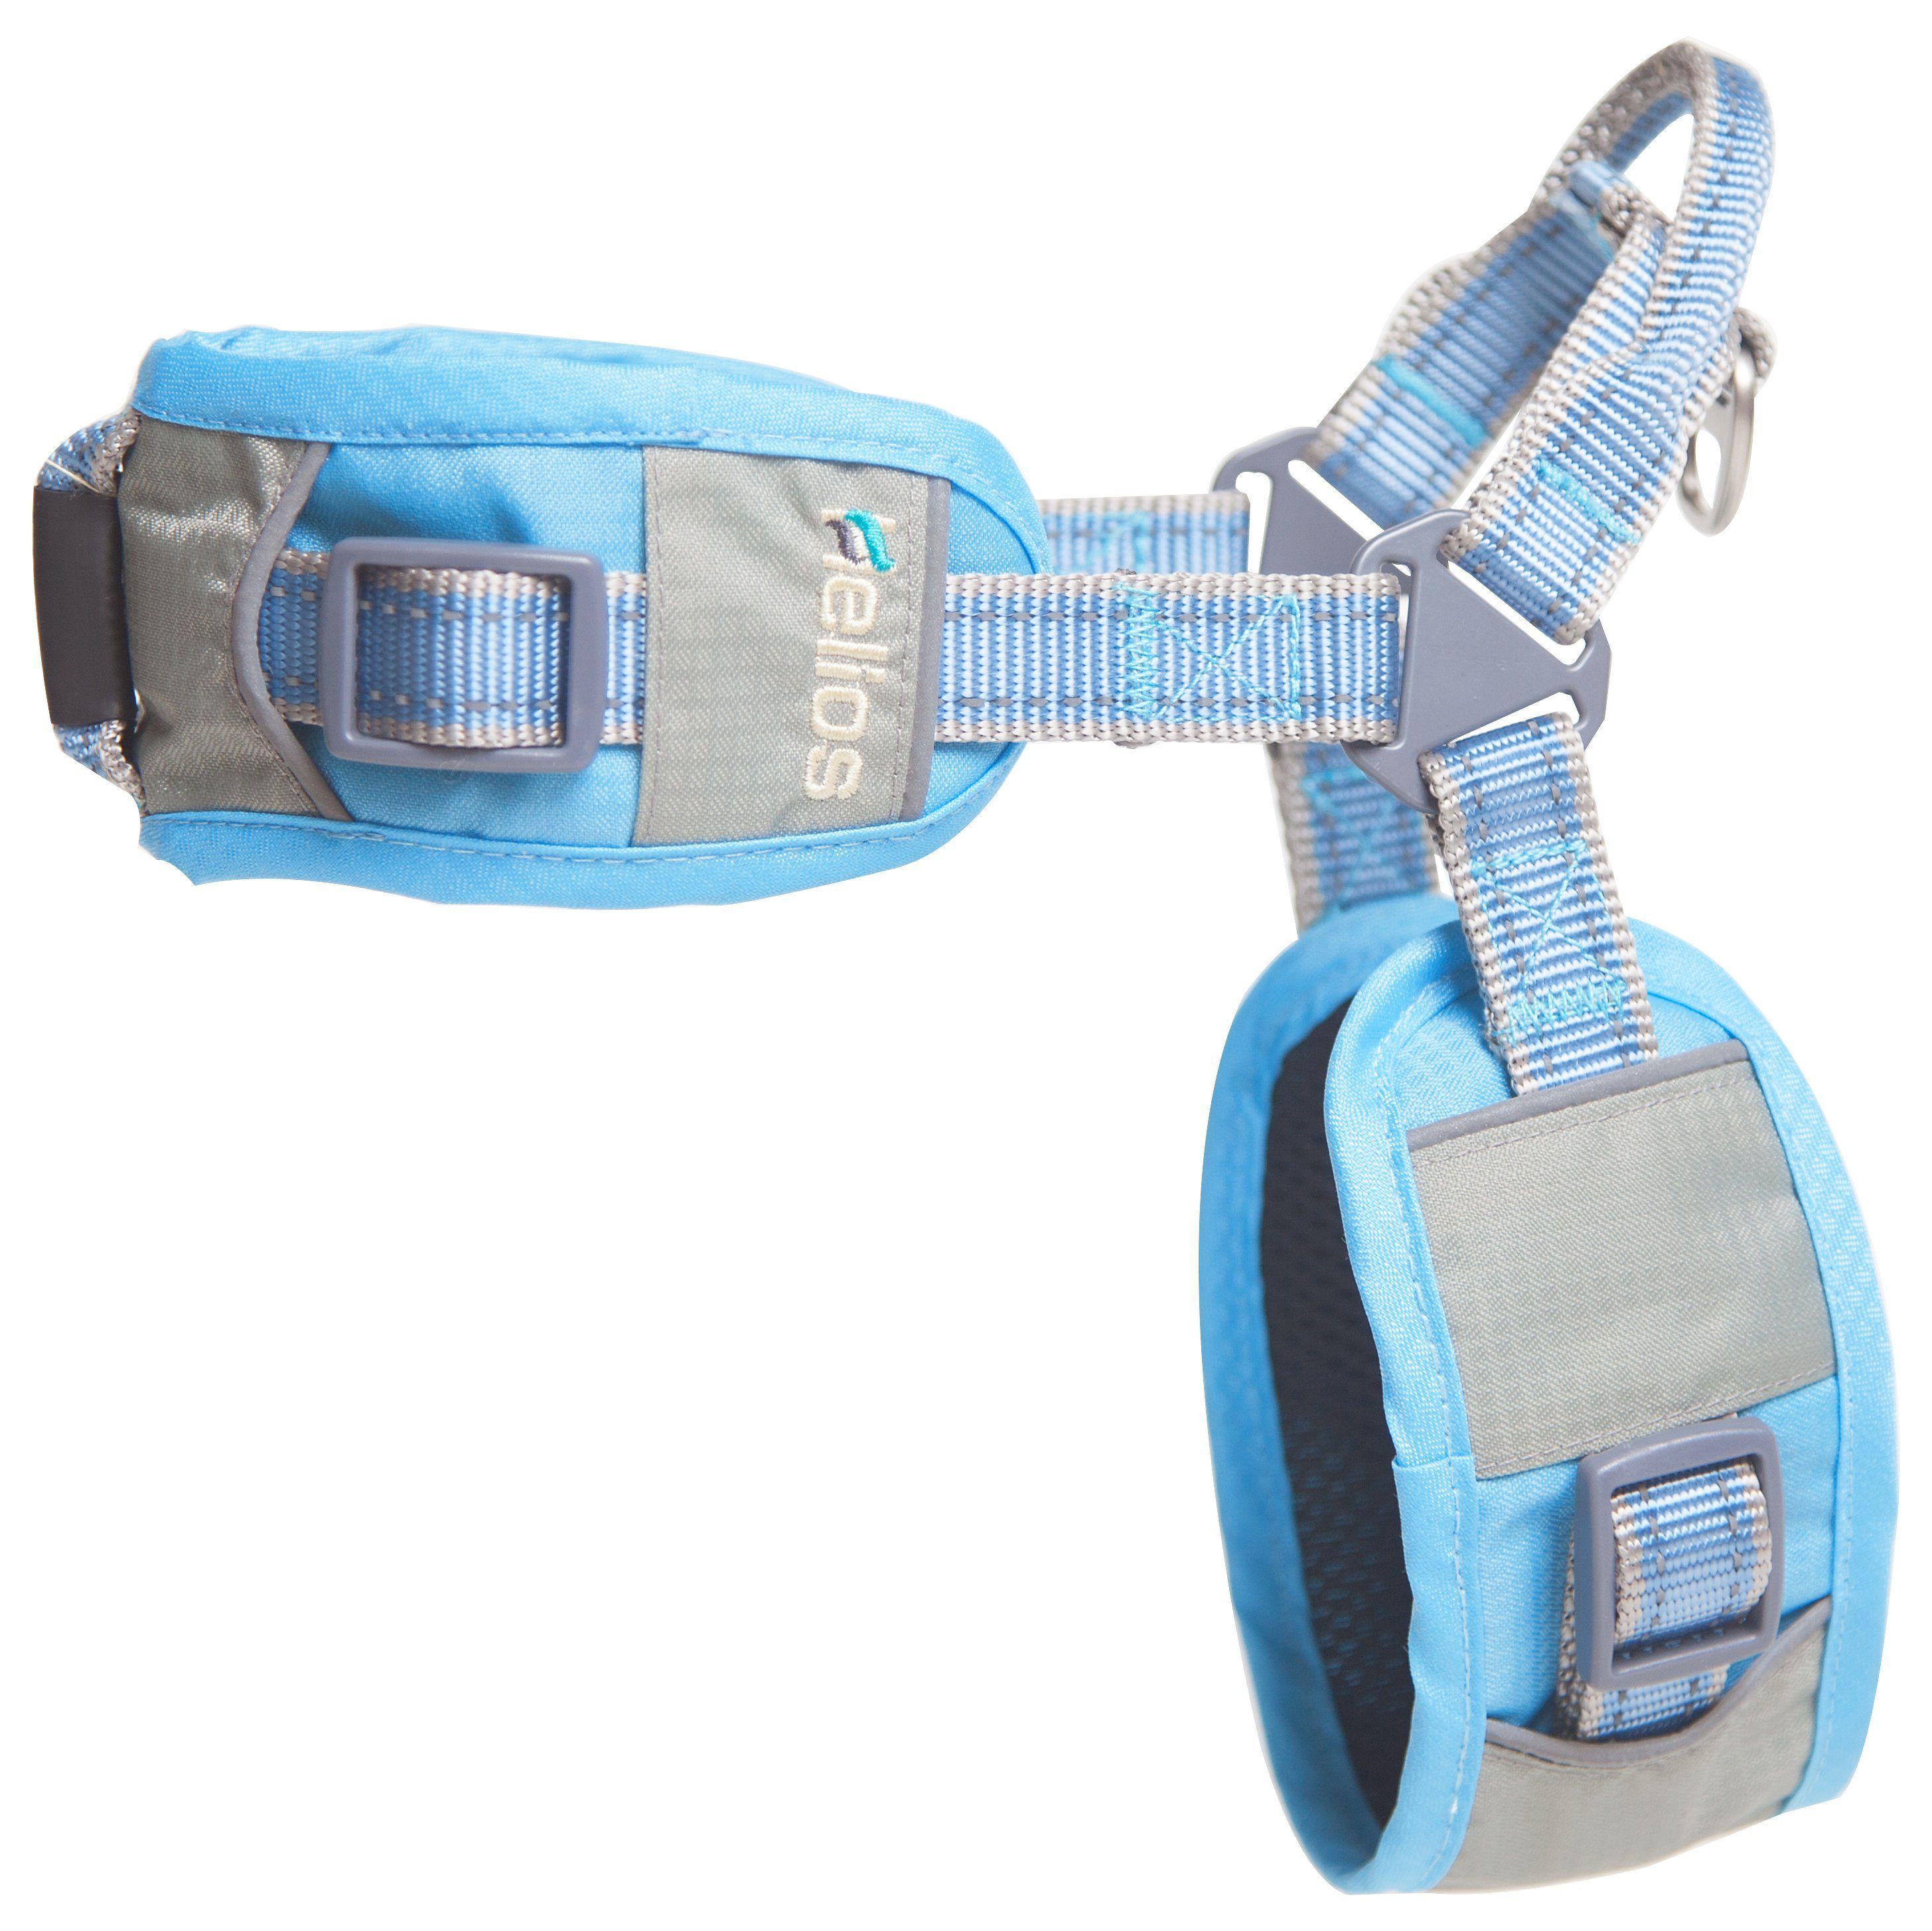 Dog Helios 'Geo-turf' Performance Adjustible and Reflective Dog Harness and Leash Small Blue